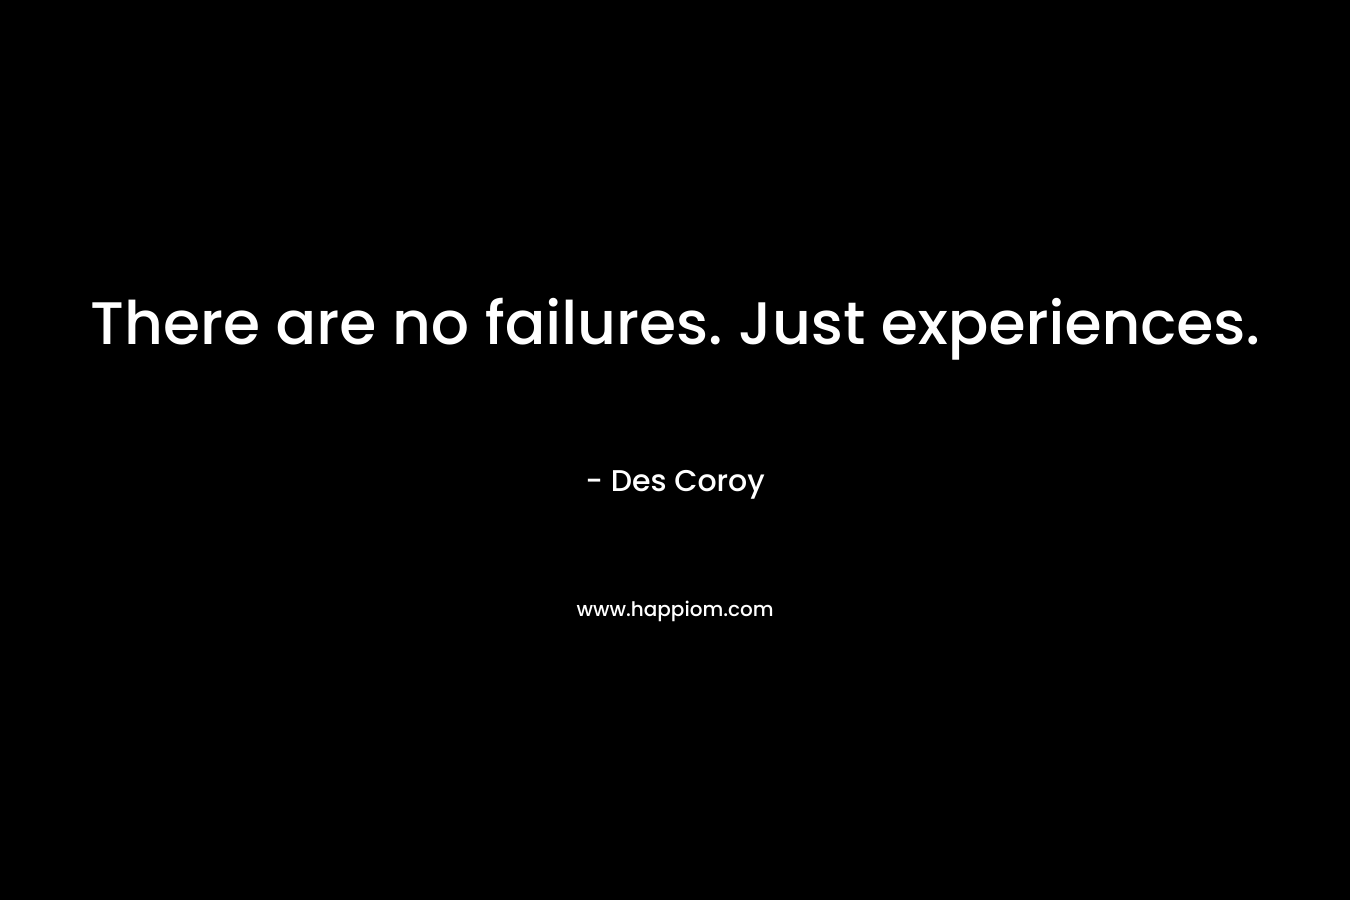 There are no failures. Just experiences.